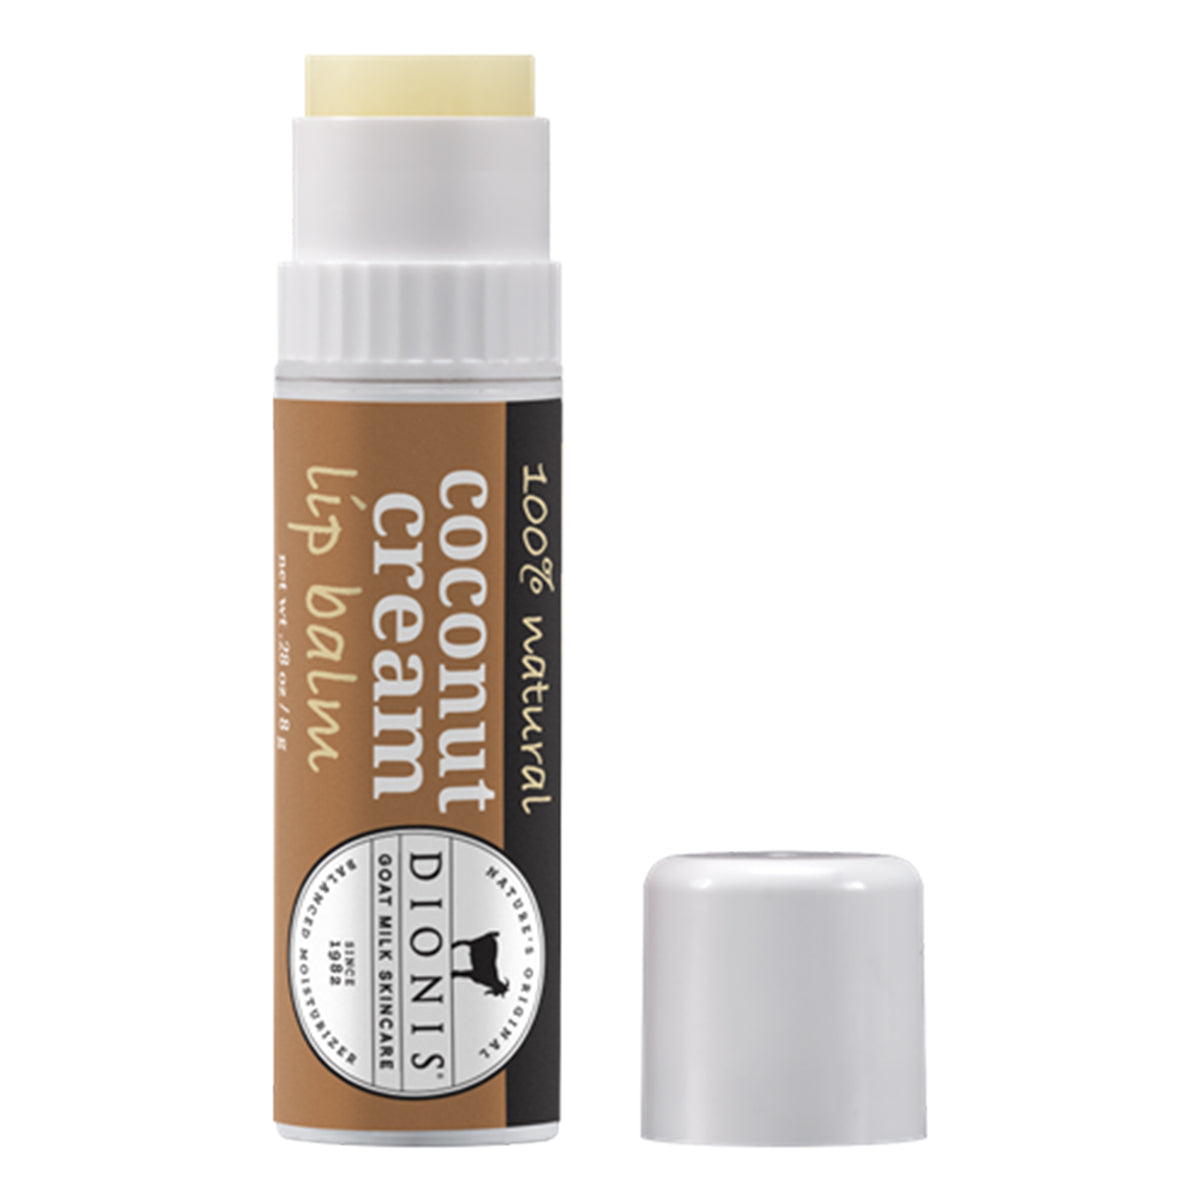 A tube of Dionis Creamy Coconut lip balm with its cap removed, displayed against a white background.